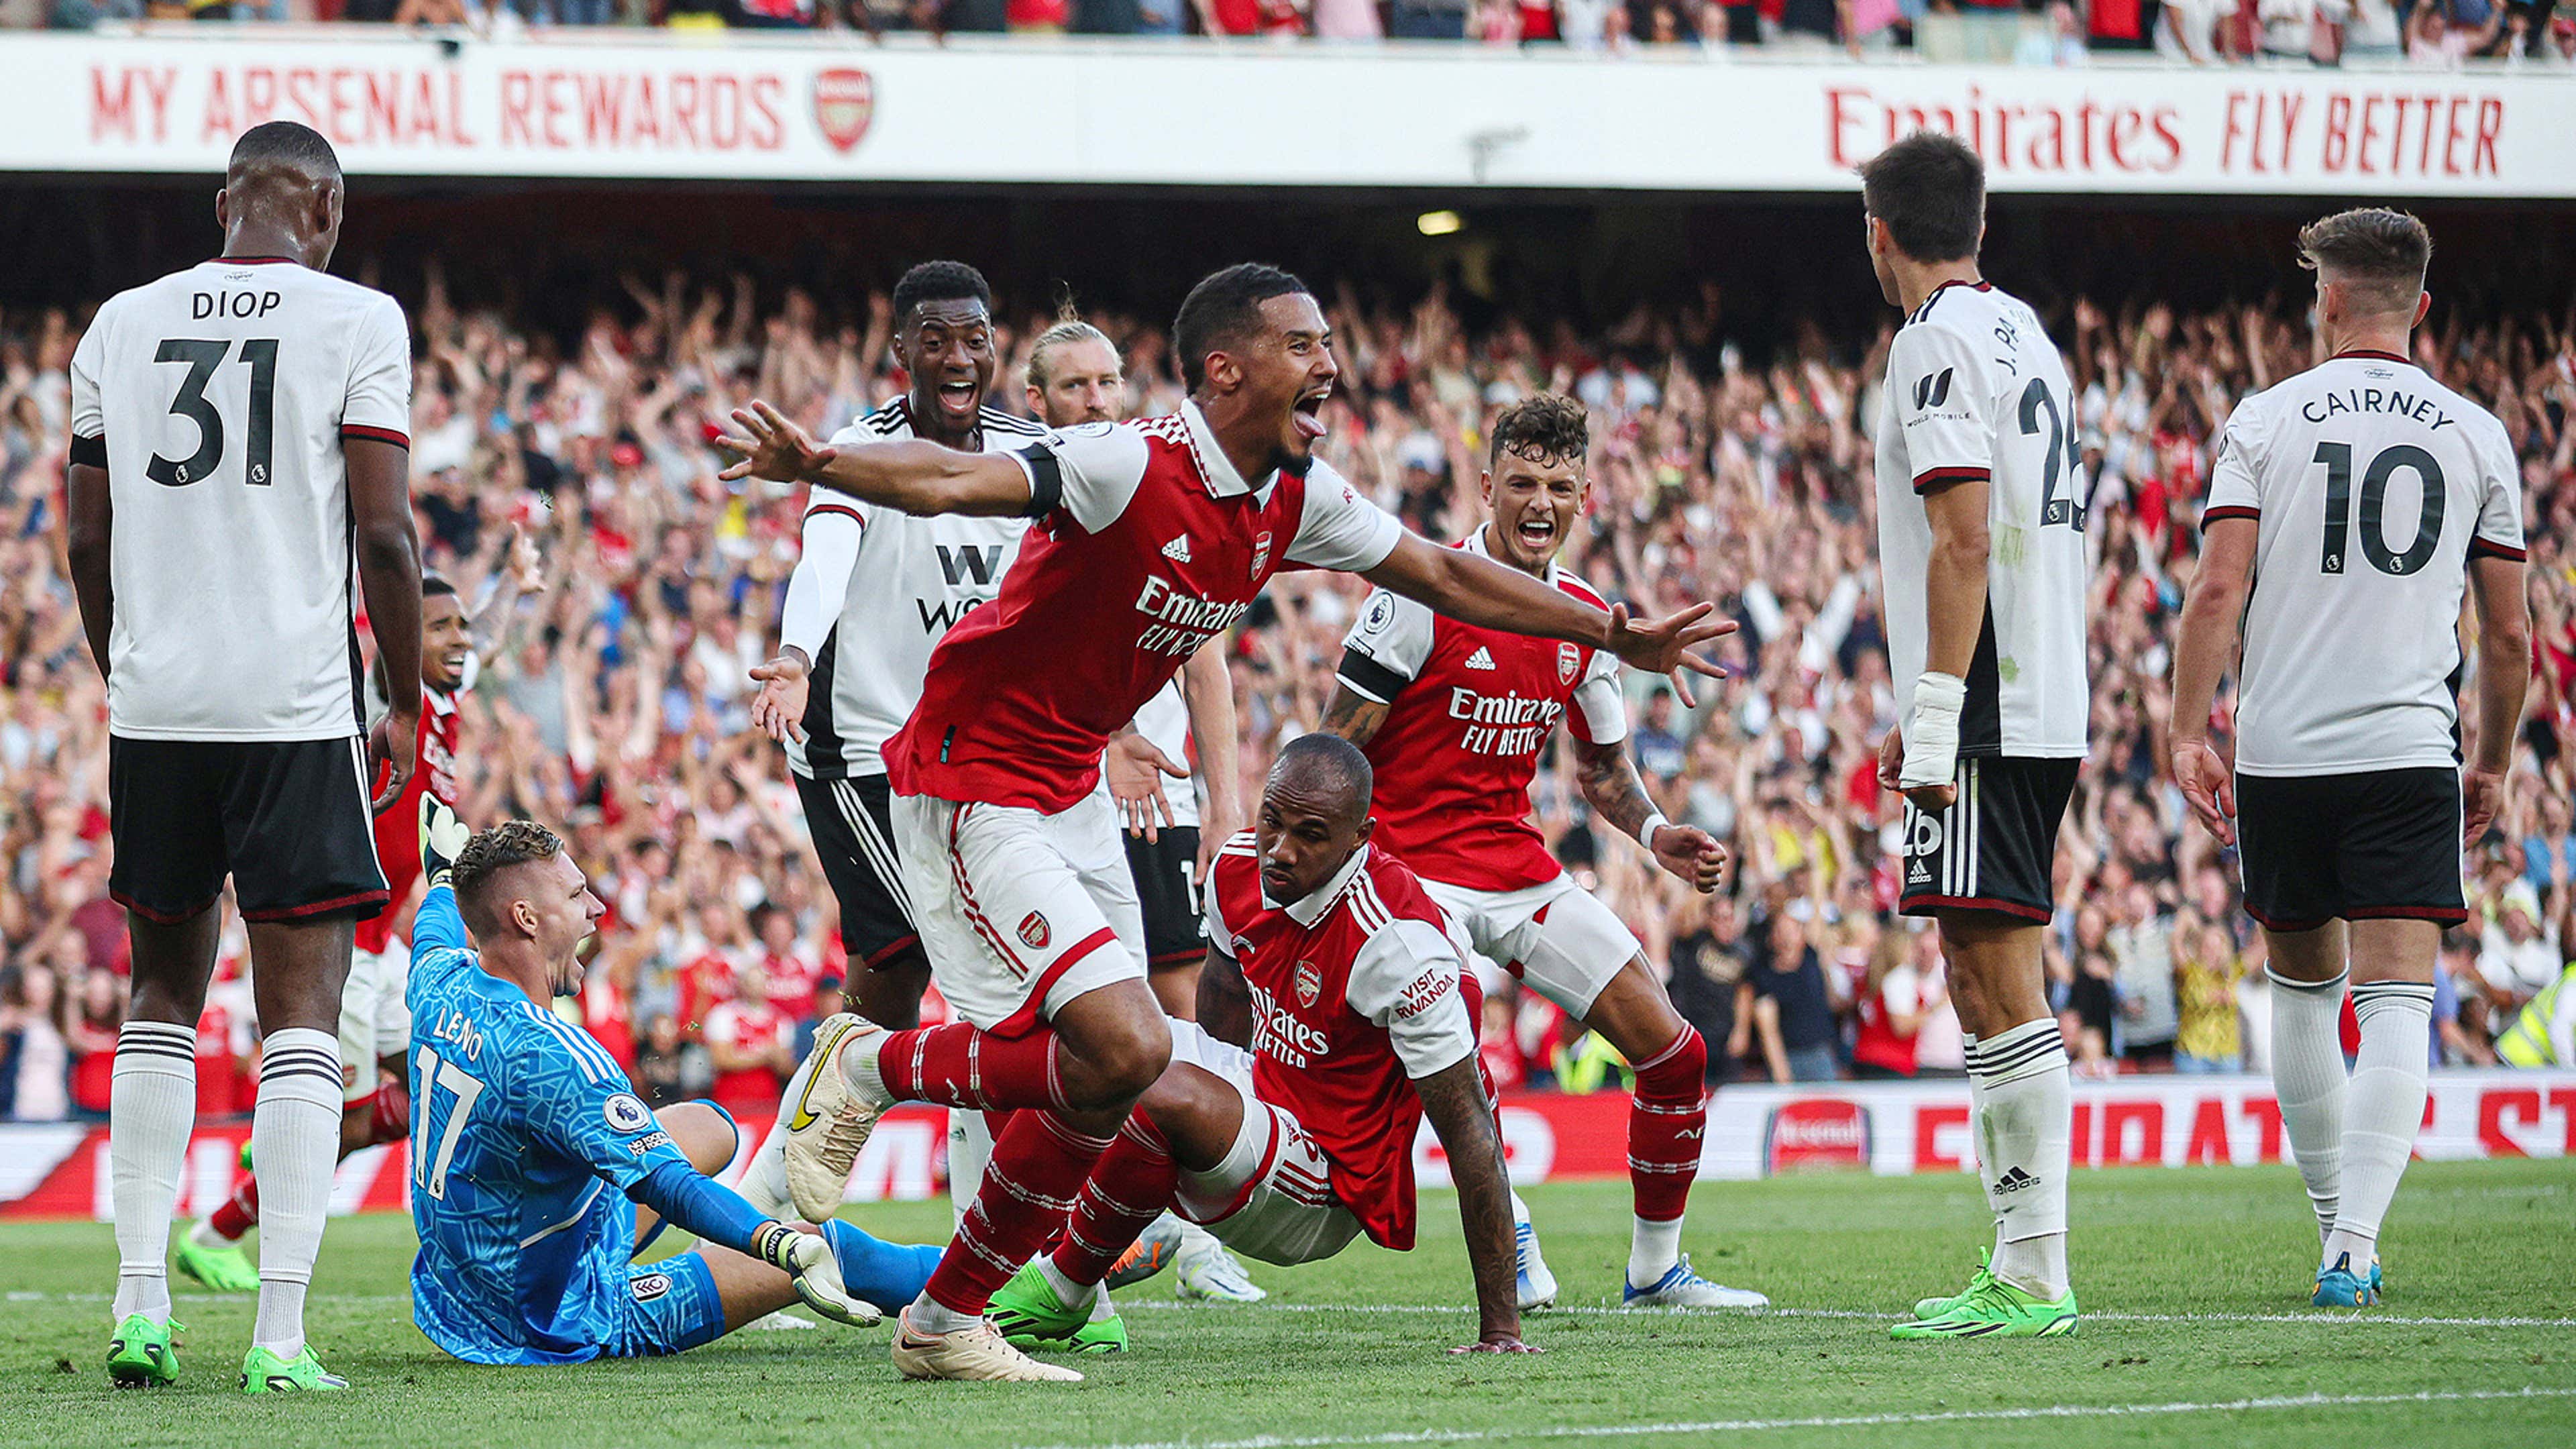 Newcastle in title race after Arsenal draw but coach remains humble